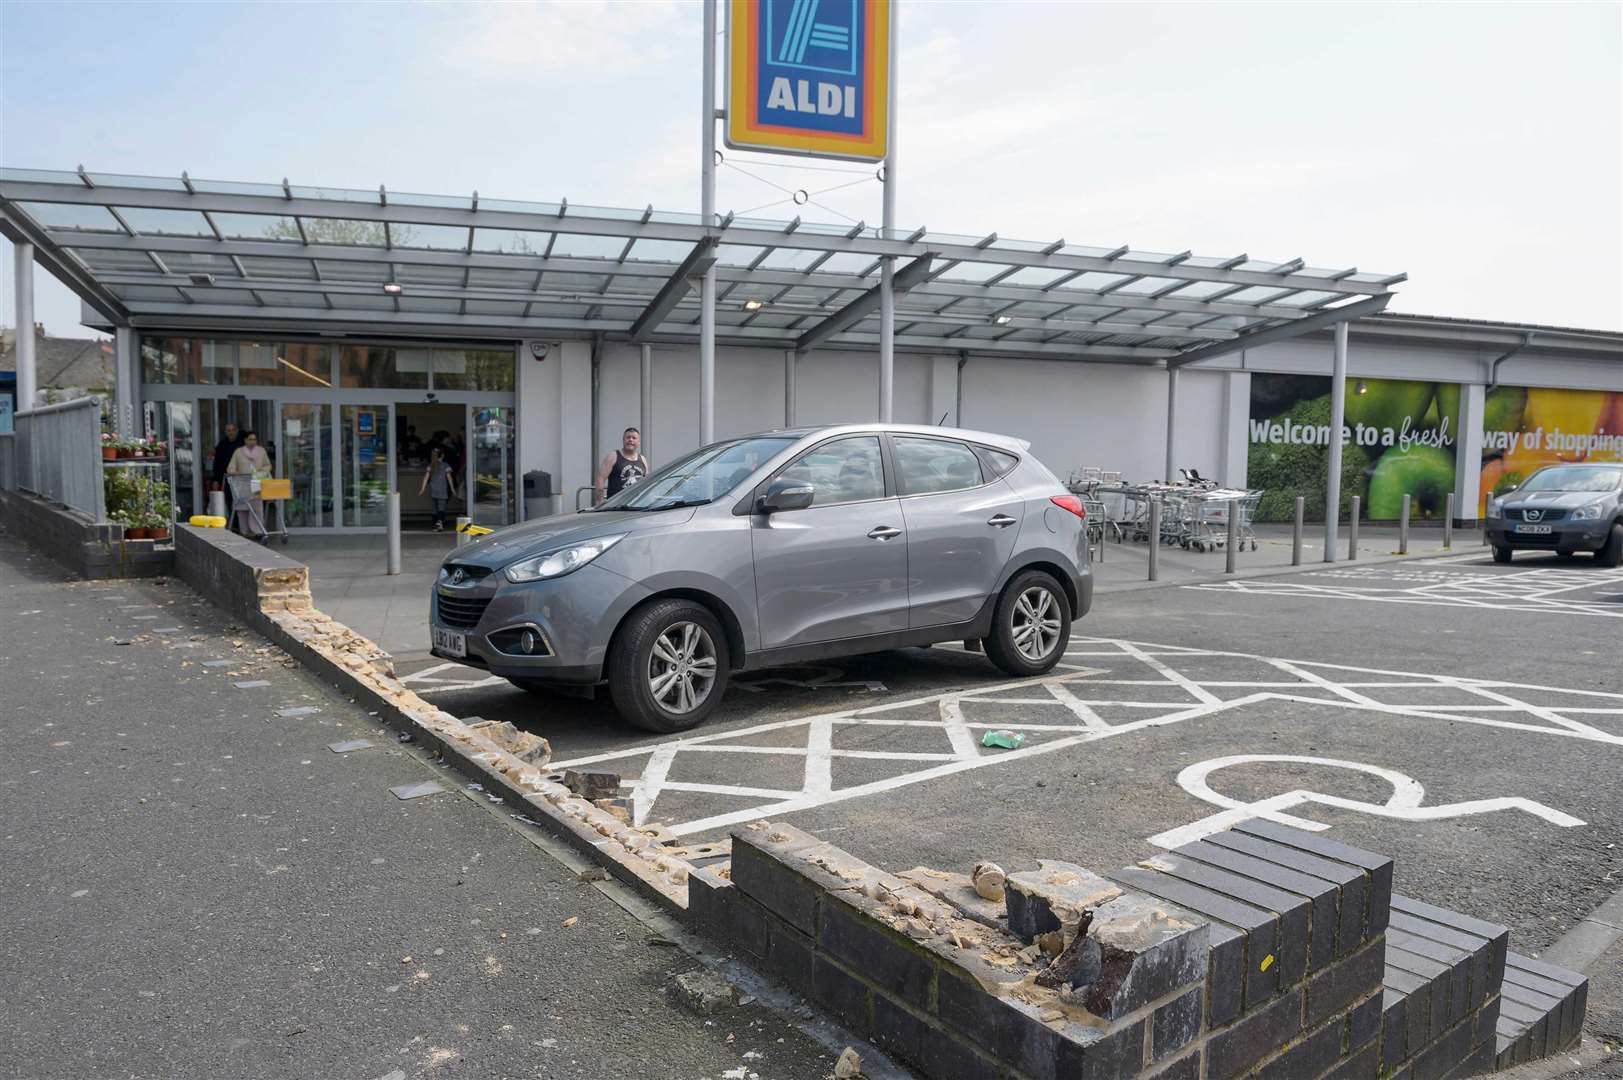 A man was taken to hospital after the crash at Aldi